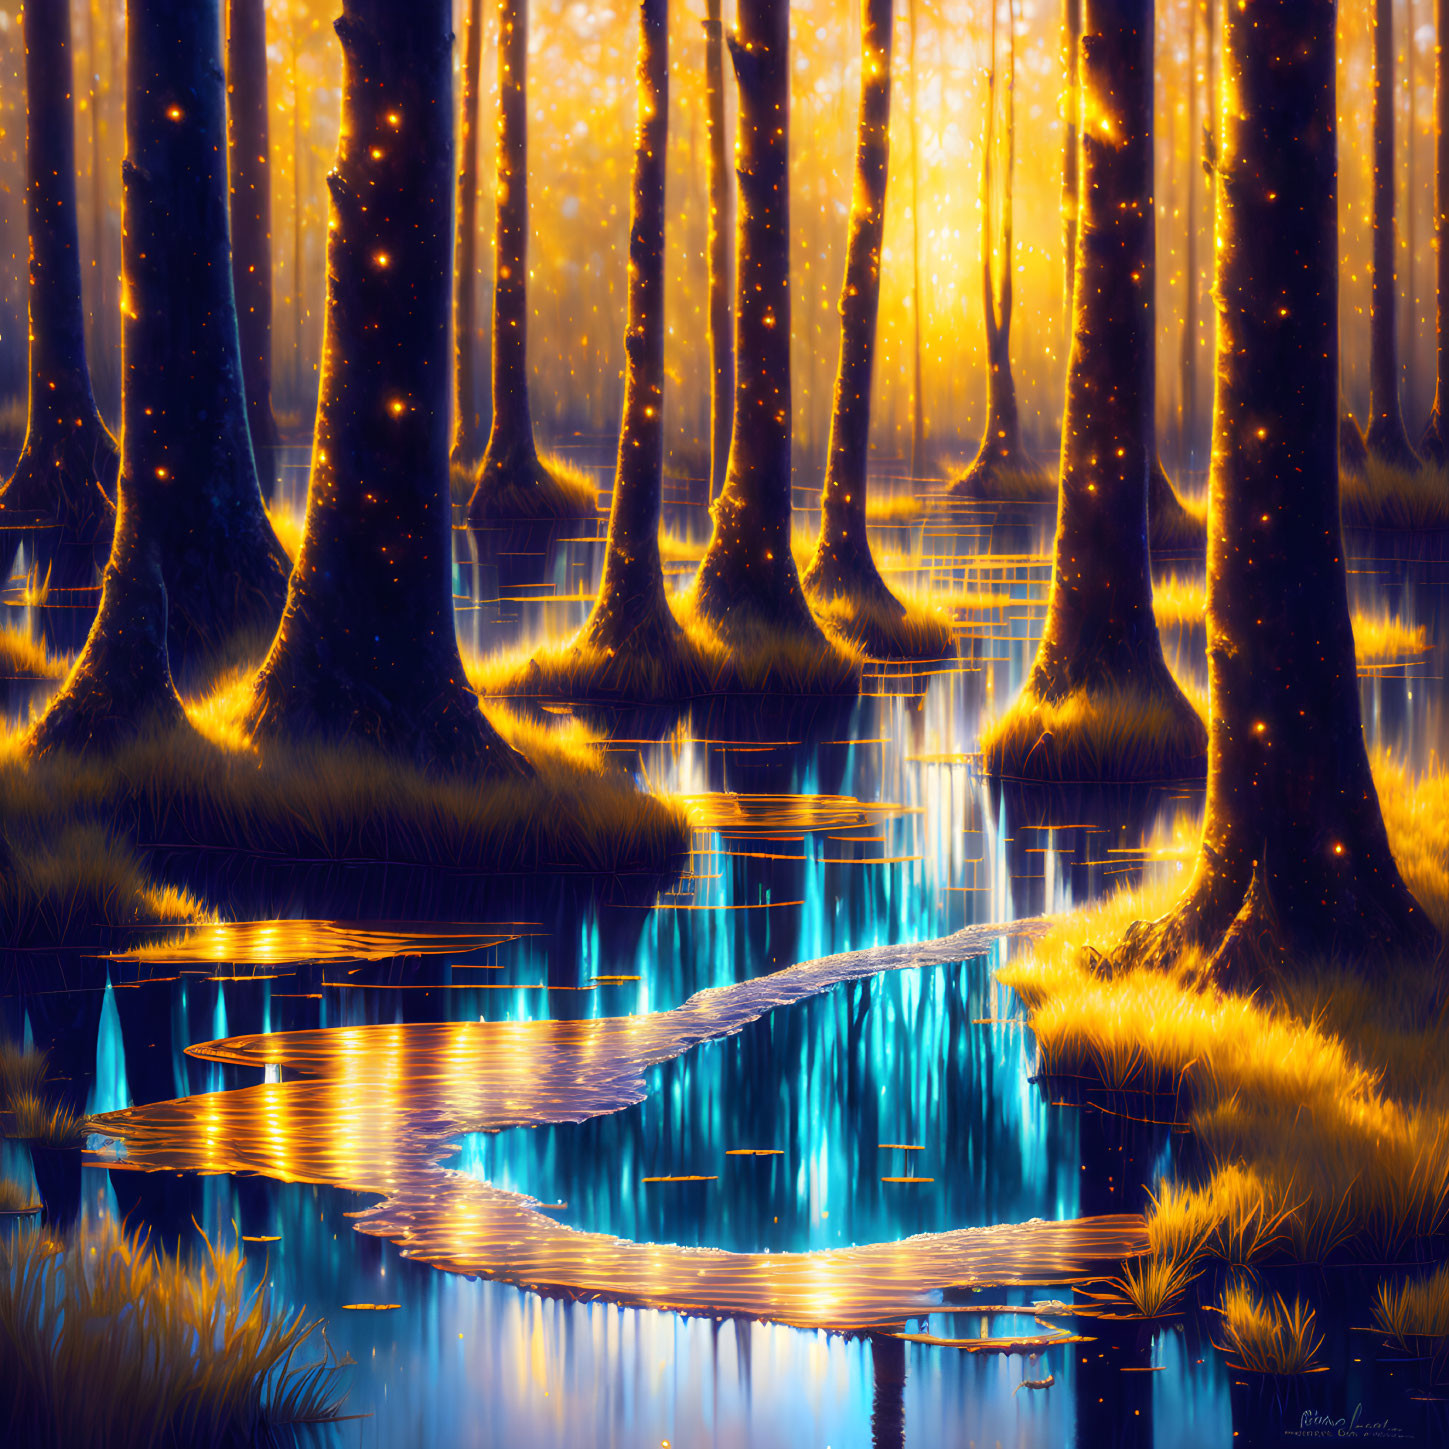 Fantastical forest scene with tall trees and glowing flora